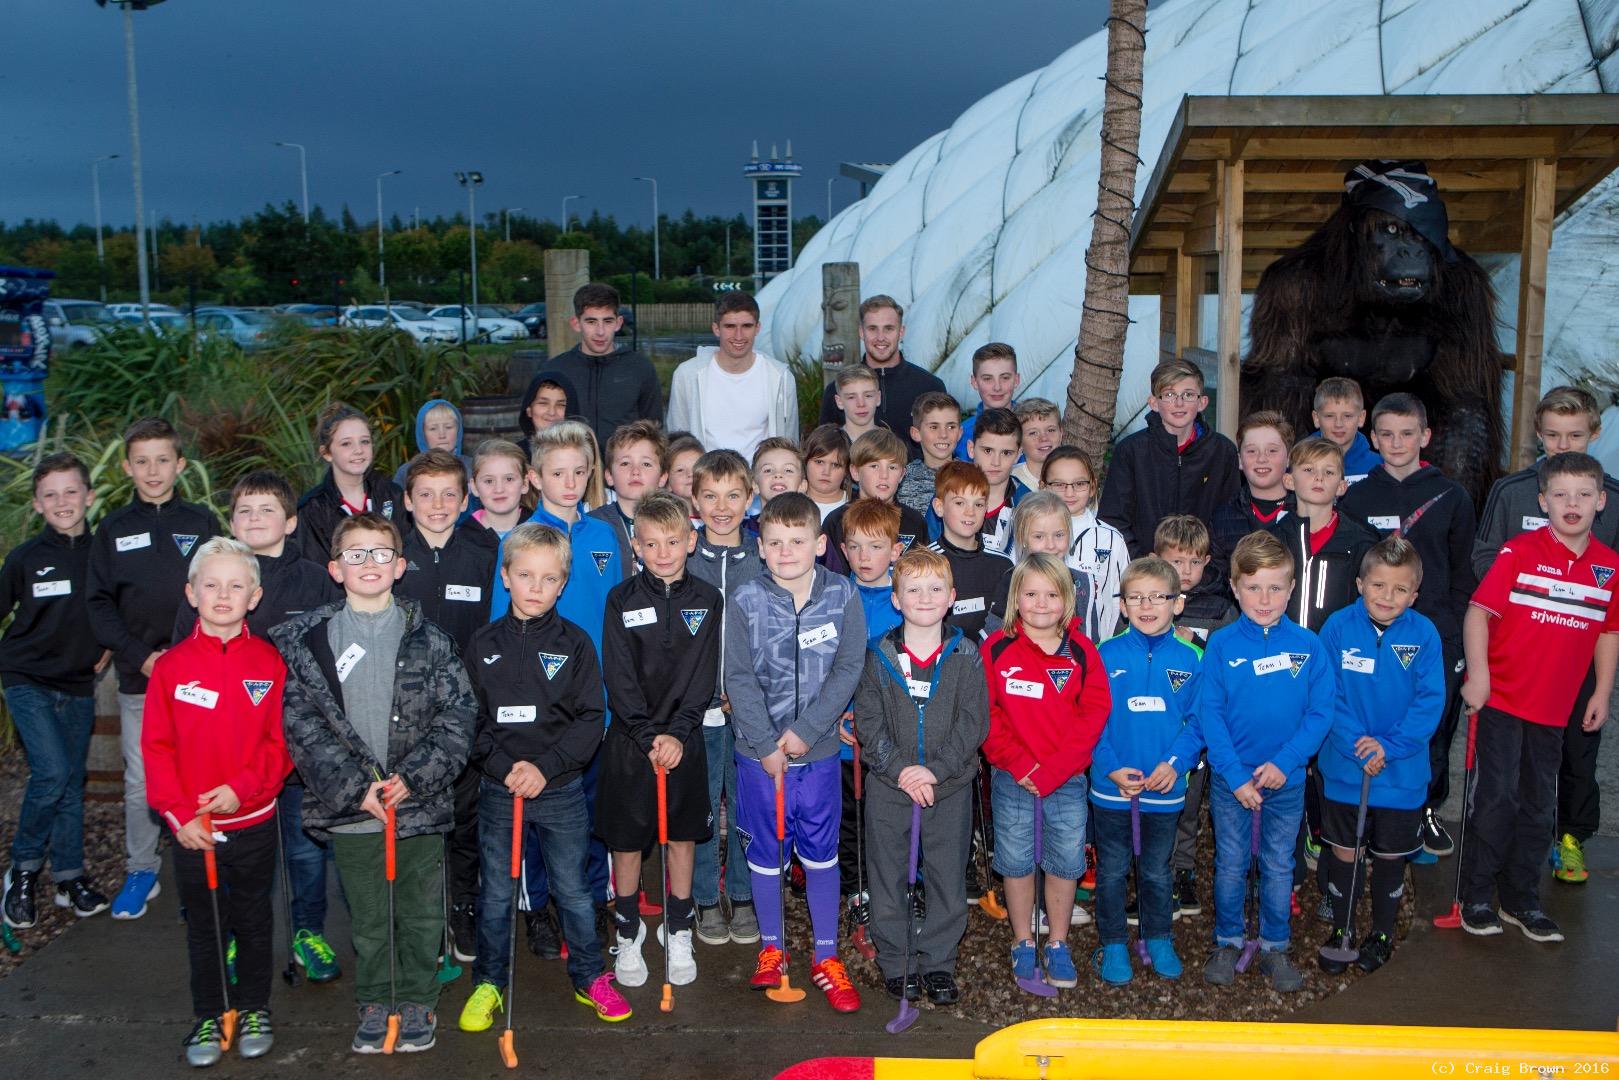 Adventure Golf for Young Pars and players